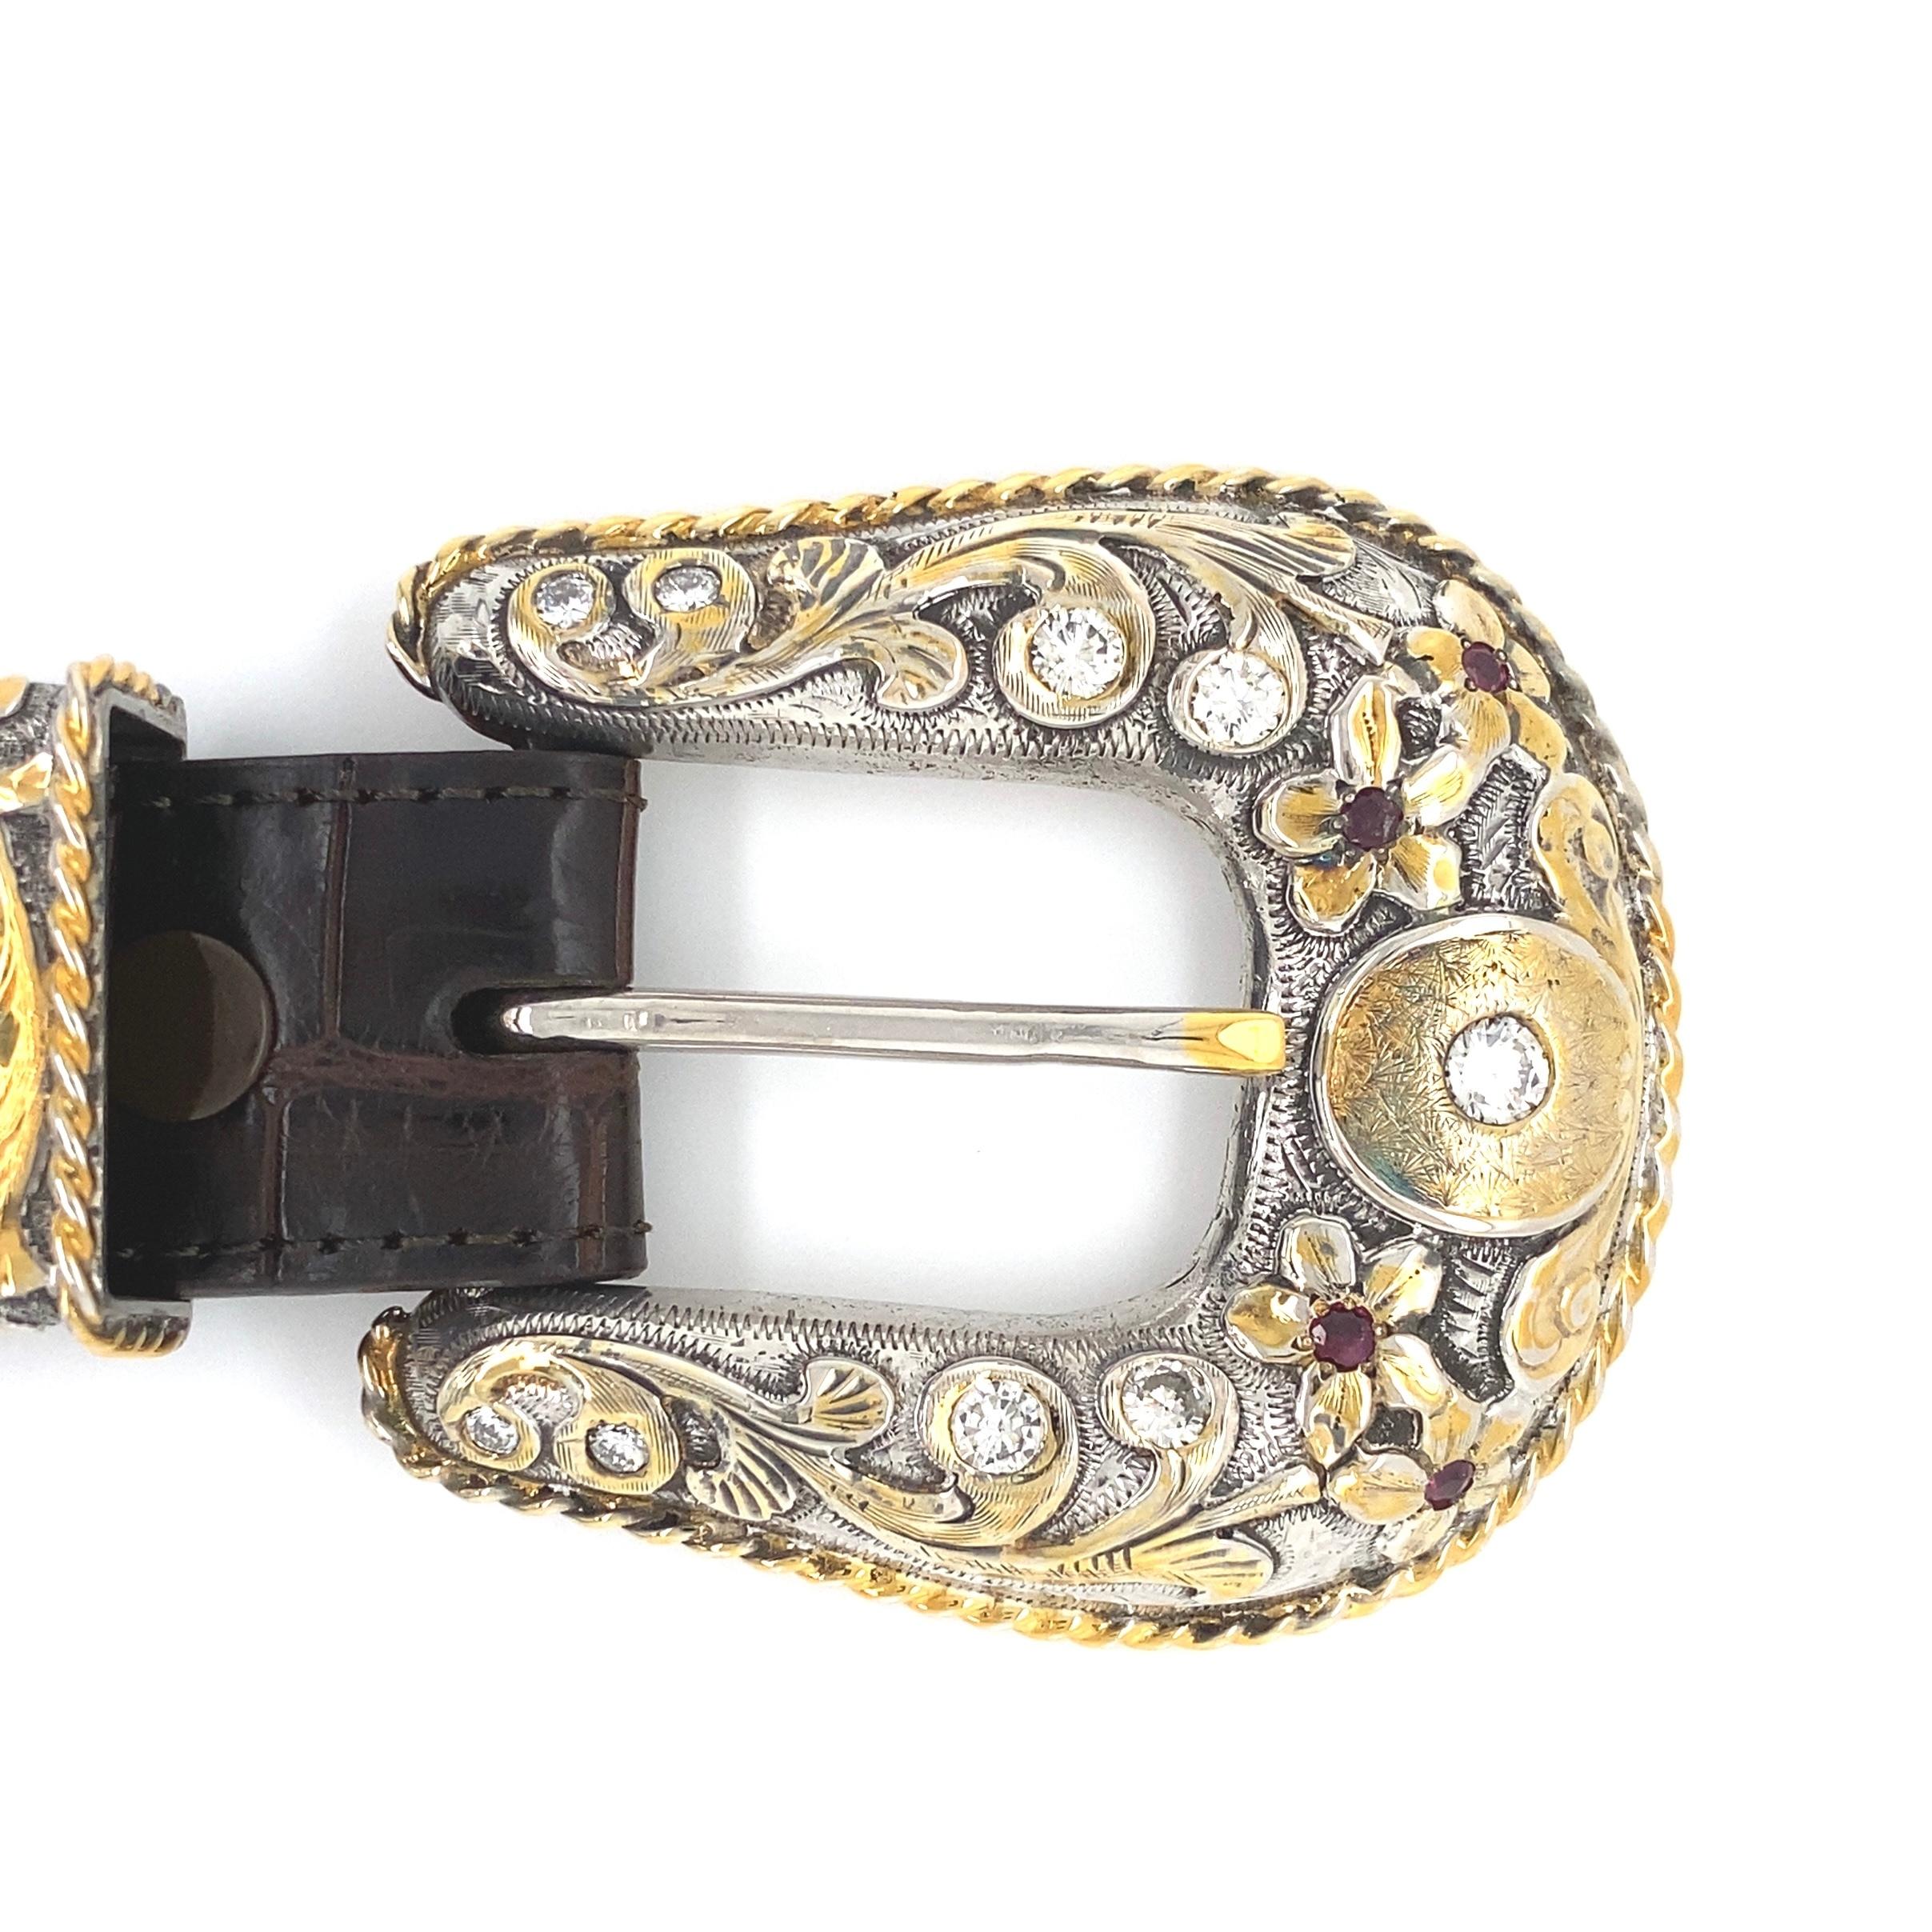 Fabulous Vintage Edward H. Bohlin Sterling Silver and 18K Yellow Gold Buckle and Alligator Belt. The Buckle is Hand set with 4.50tcw round Brilliant Diamonds and 0.70tcw rubies!  The Buckle measures approx. 2.34